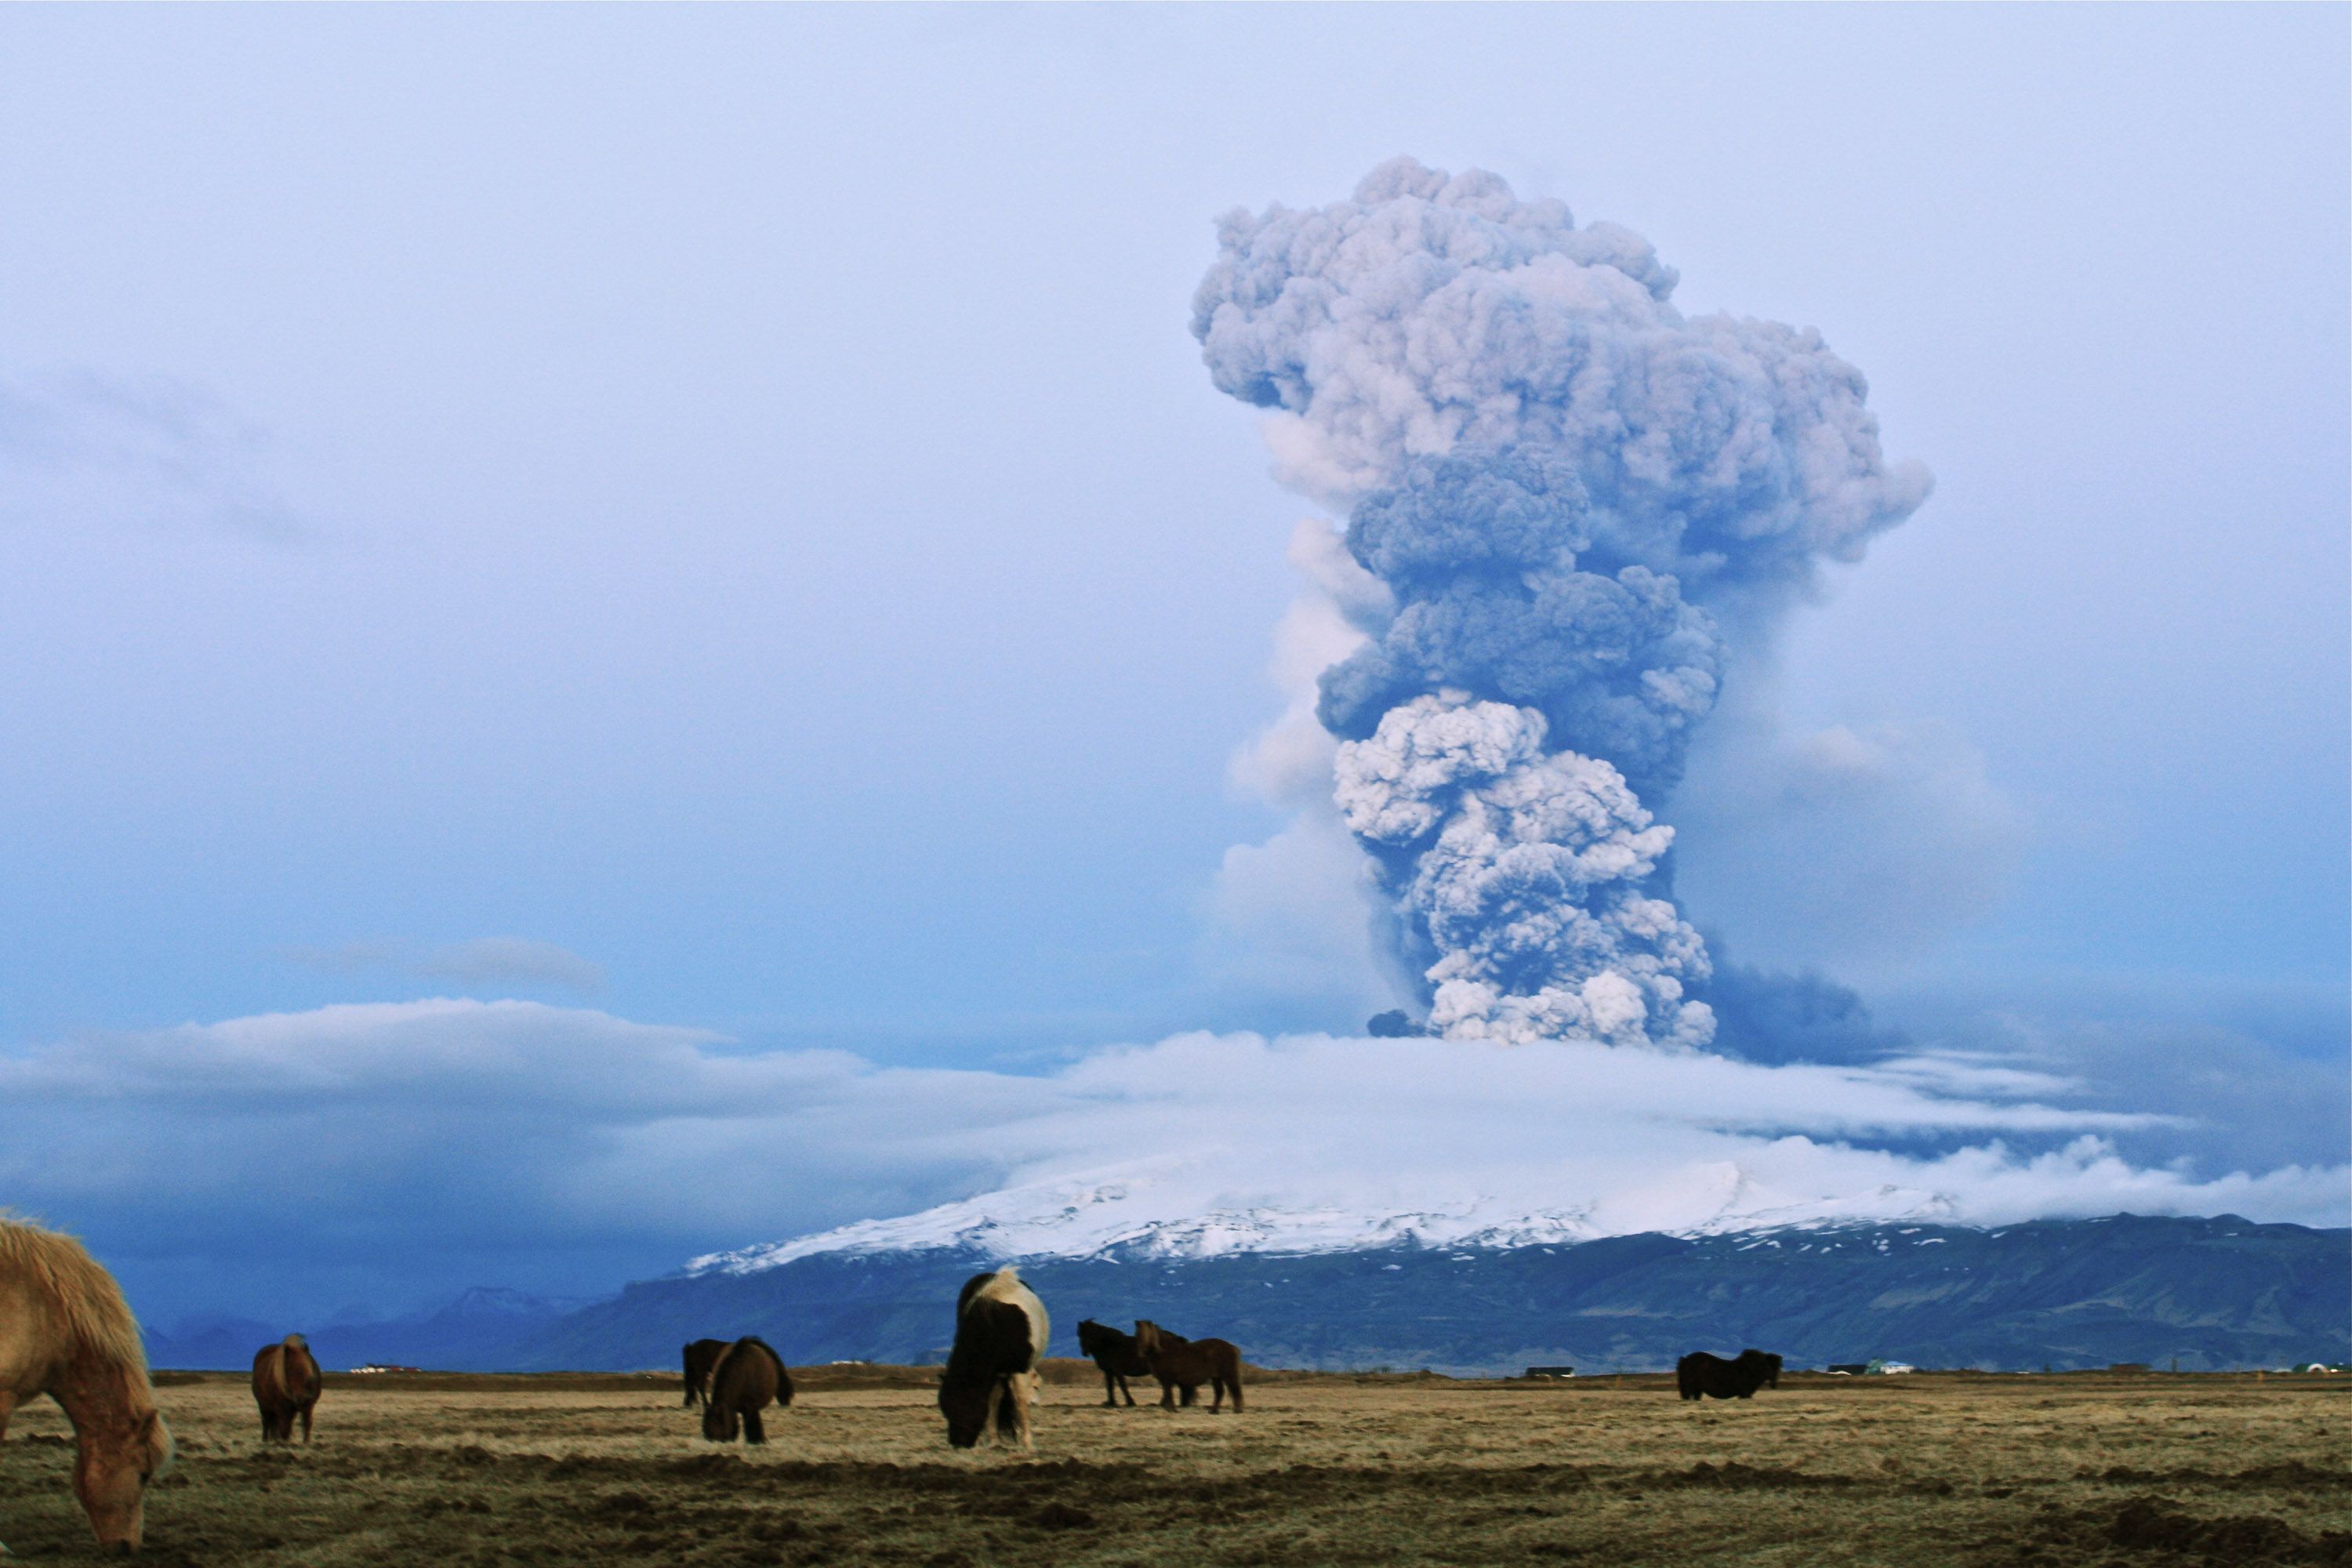 Horse graze as a cloud of volcanic matter rises from the erupting Eyjafjallajokull volcano, April 16, 2010